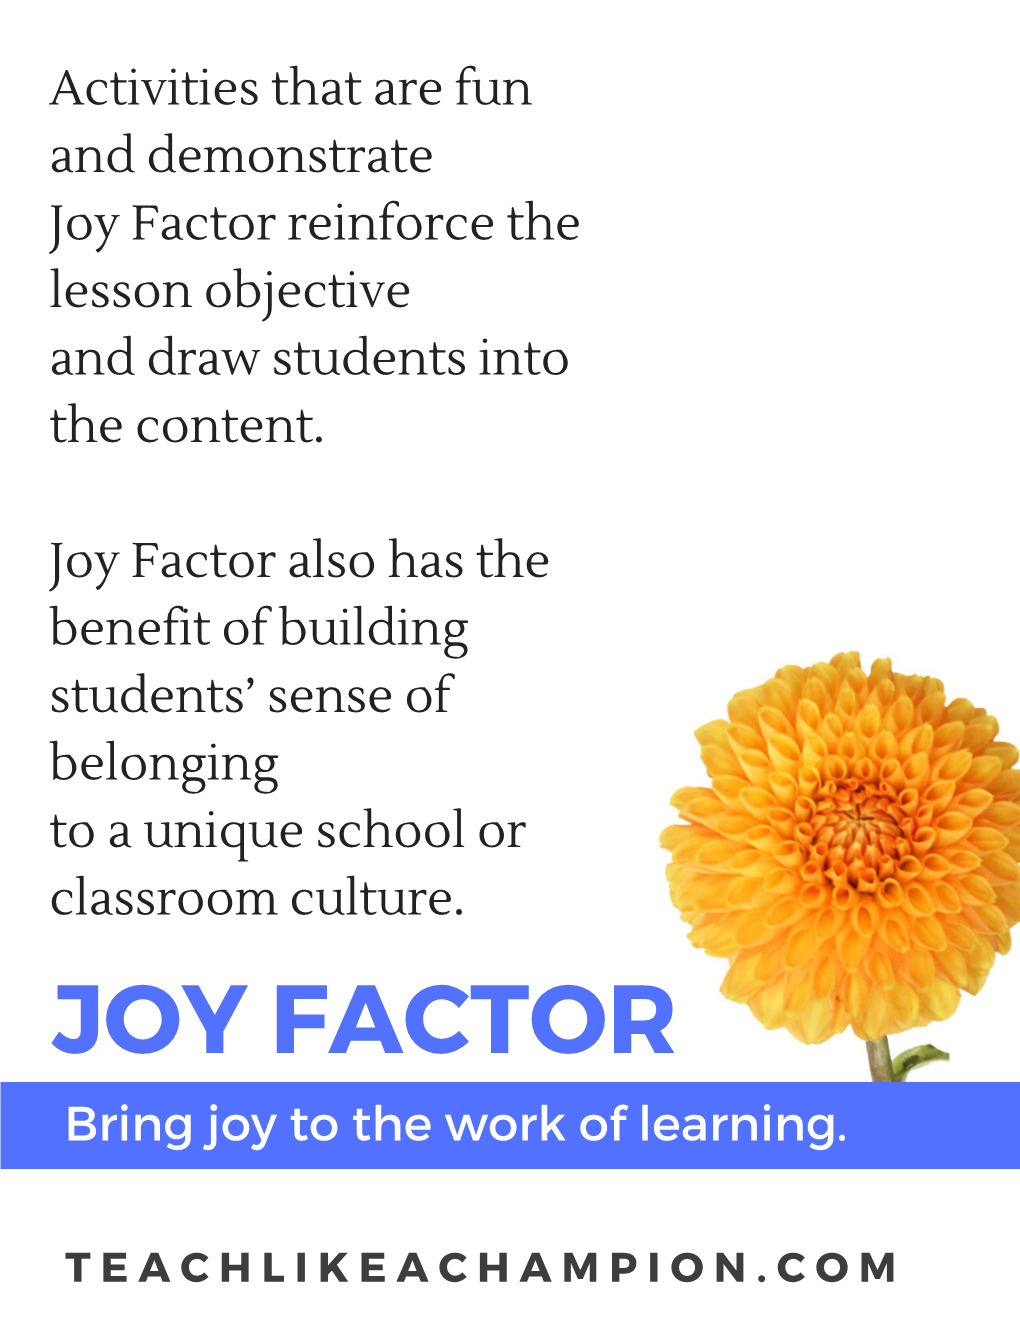 Joy Factor Reinforce the Lesson Objective and Draw Students Into the Content